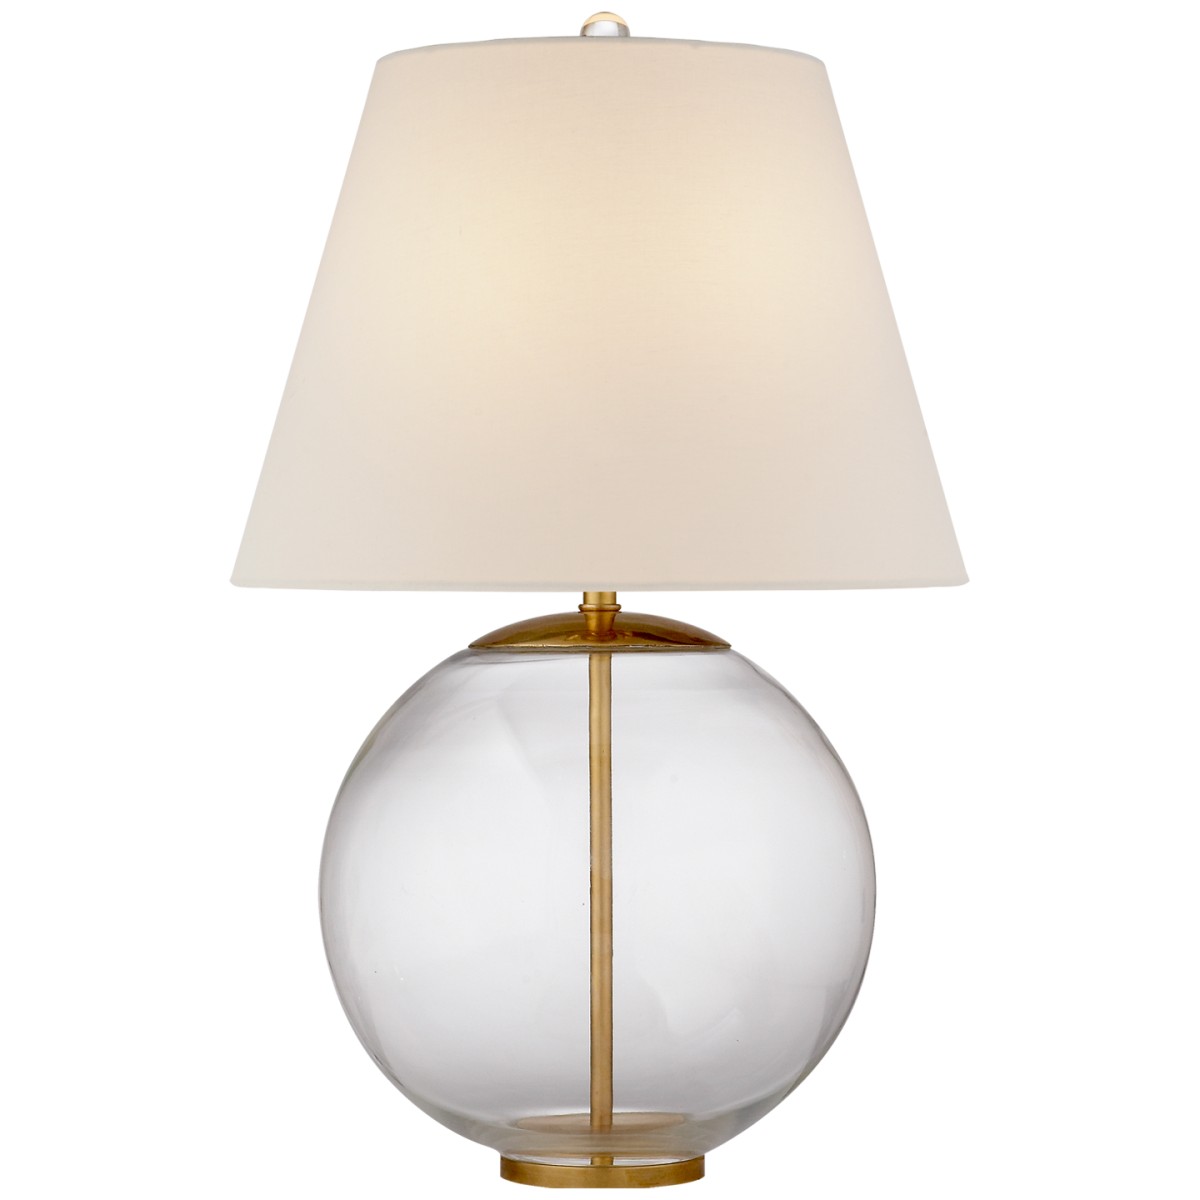 Morton Table Lamp with Linen Shade